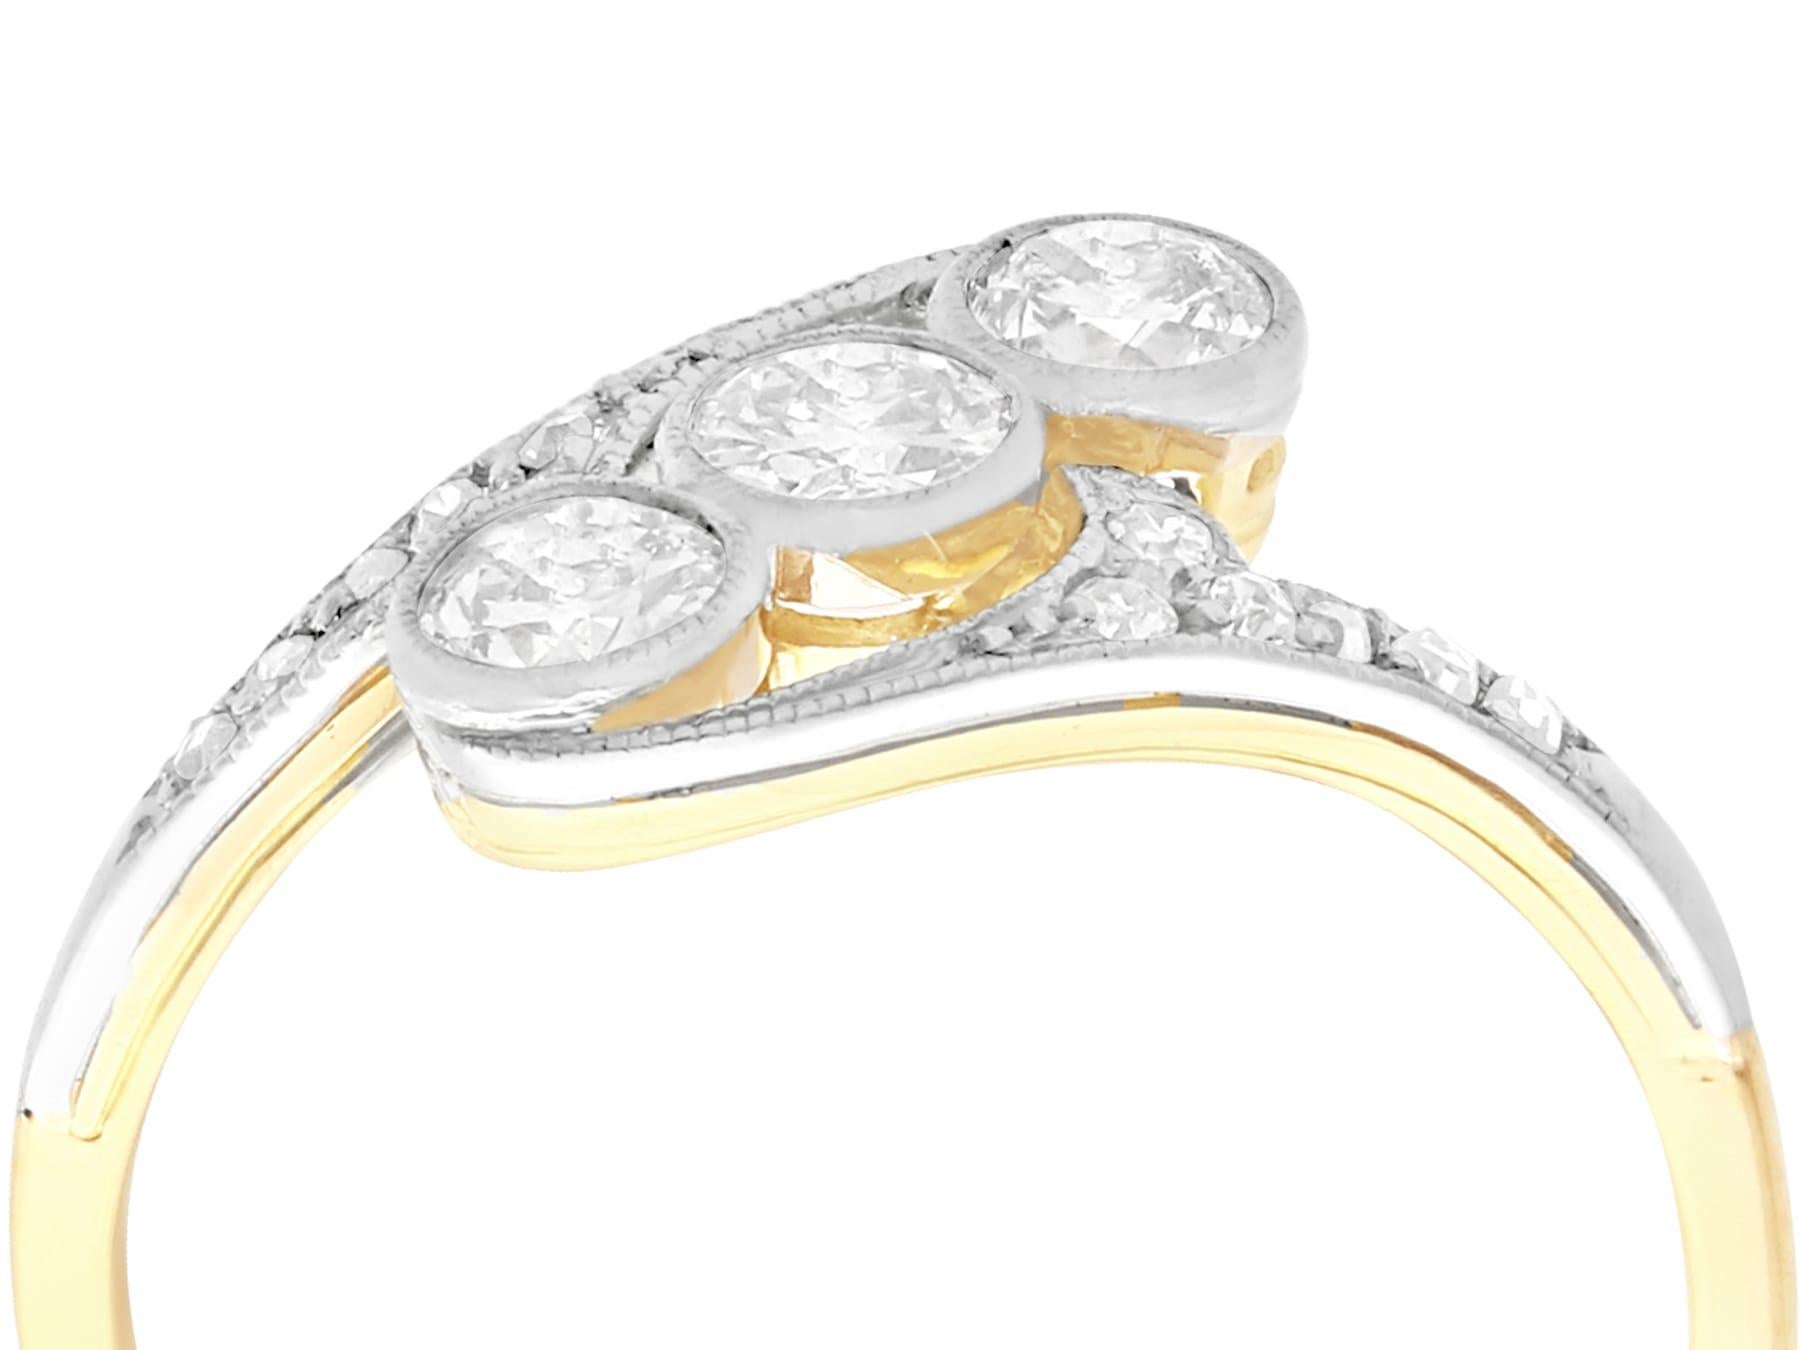 An impressive antique 1920s 0.62 carat diamond and 18 karat yellow gold, 18 karat white gold set trilogy twist ring; part of our diverse antique jewelry collections.

This fine and impressive diamond trilogy twist ring has been crafted in 18k yellow